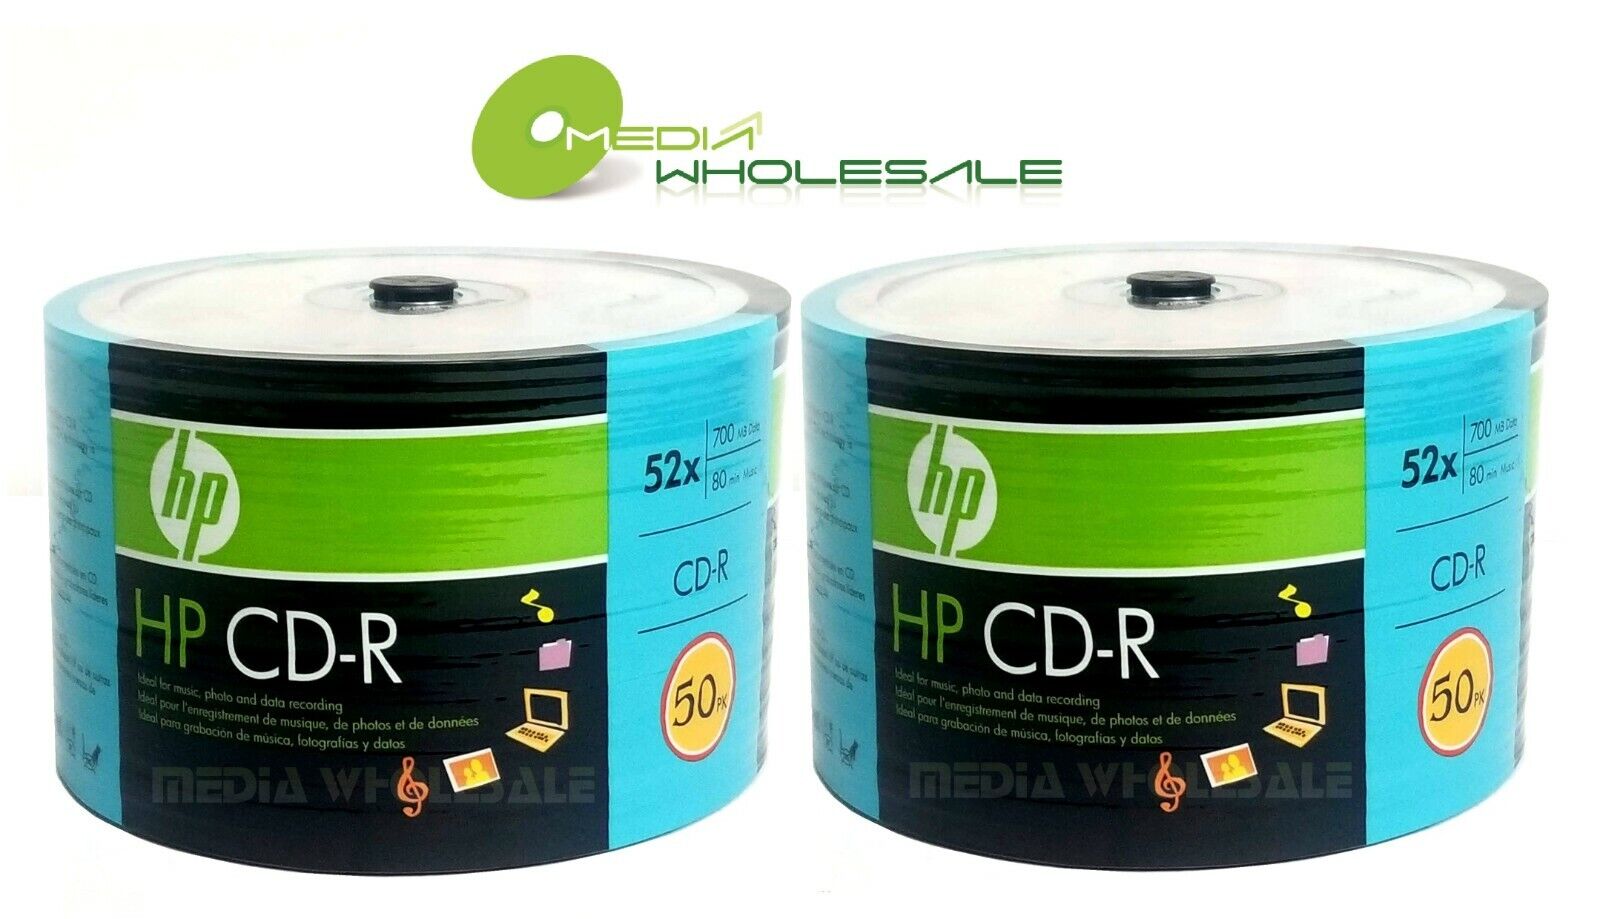 100 HP CD-R CDR Logo Top Discs Blank 52X 700MB 80MIN In ECO Spindle (Storage)